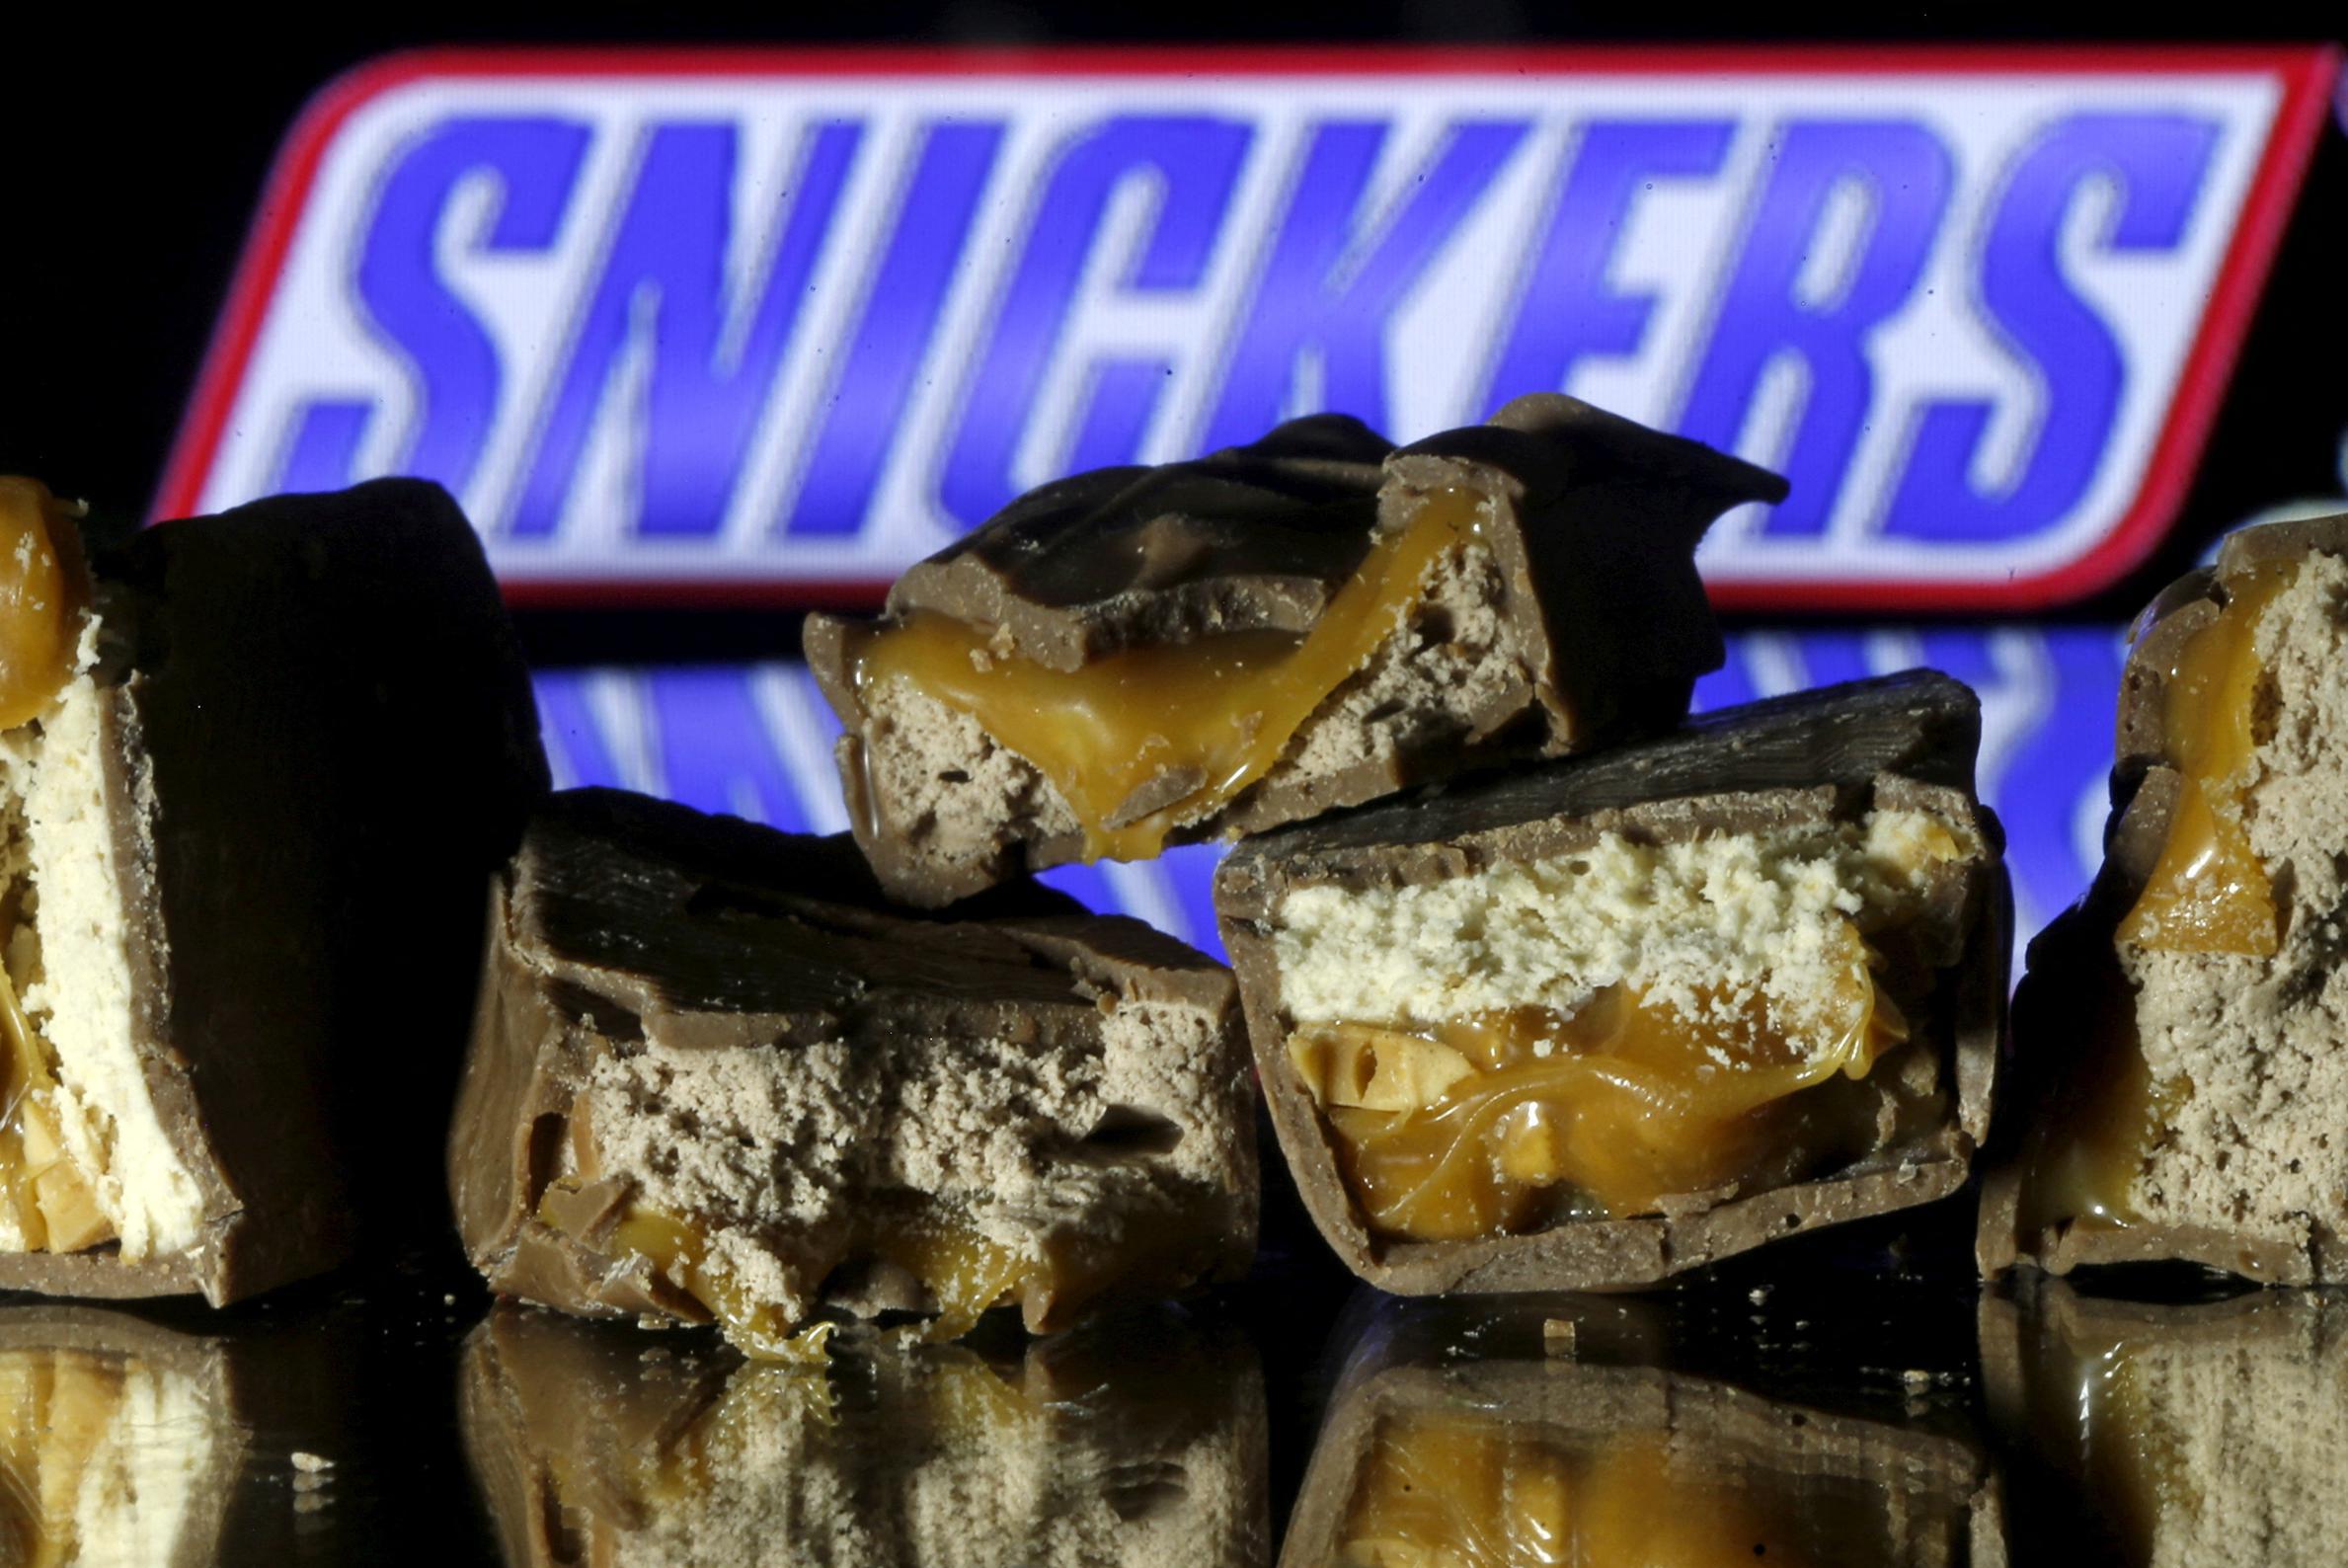 Snickers expresses regret for depicting Taiwan as a nation